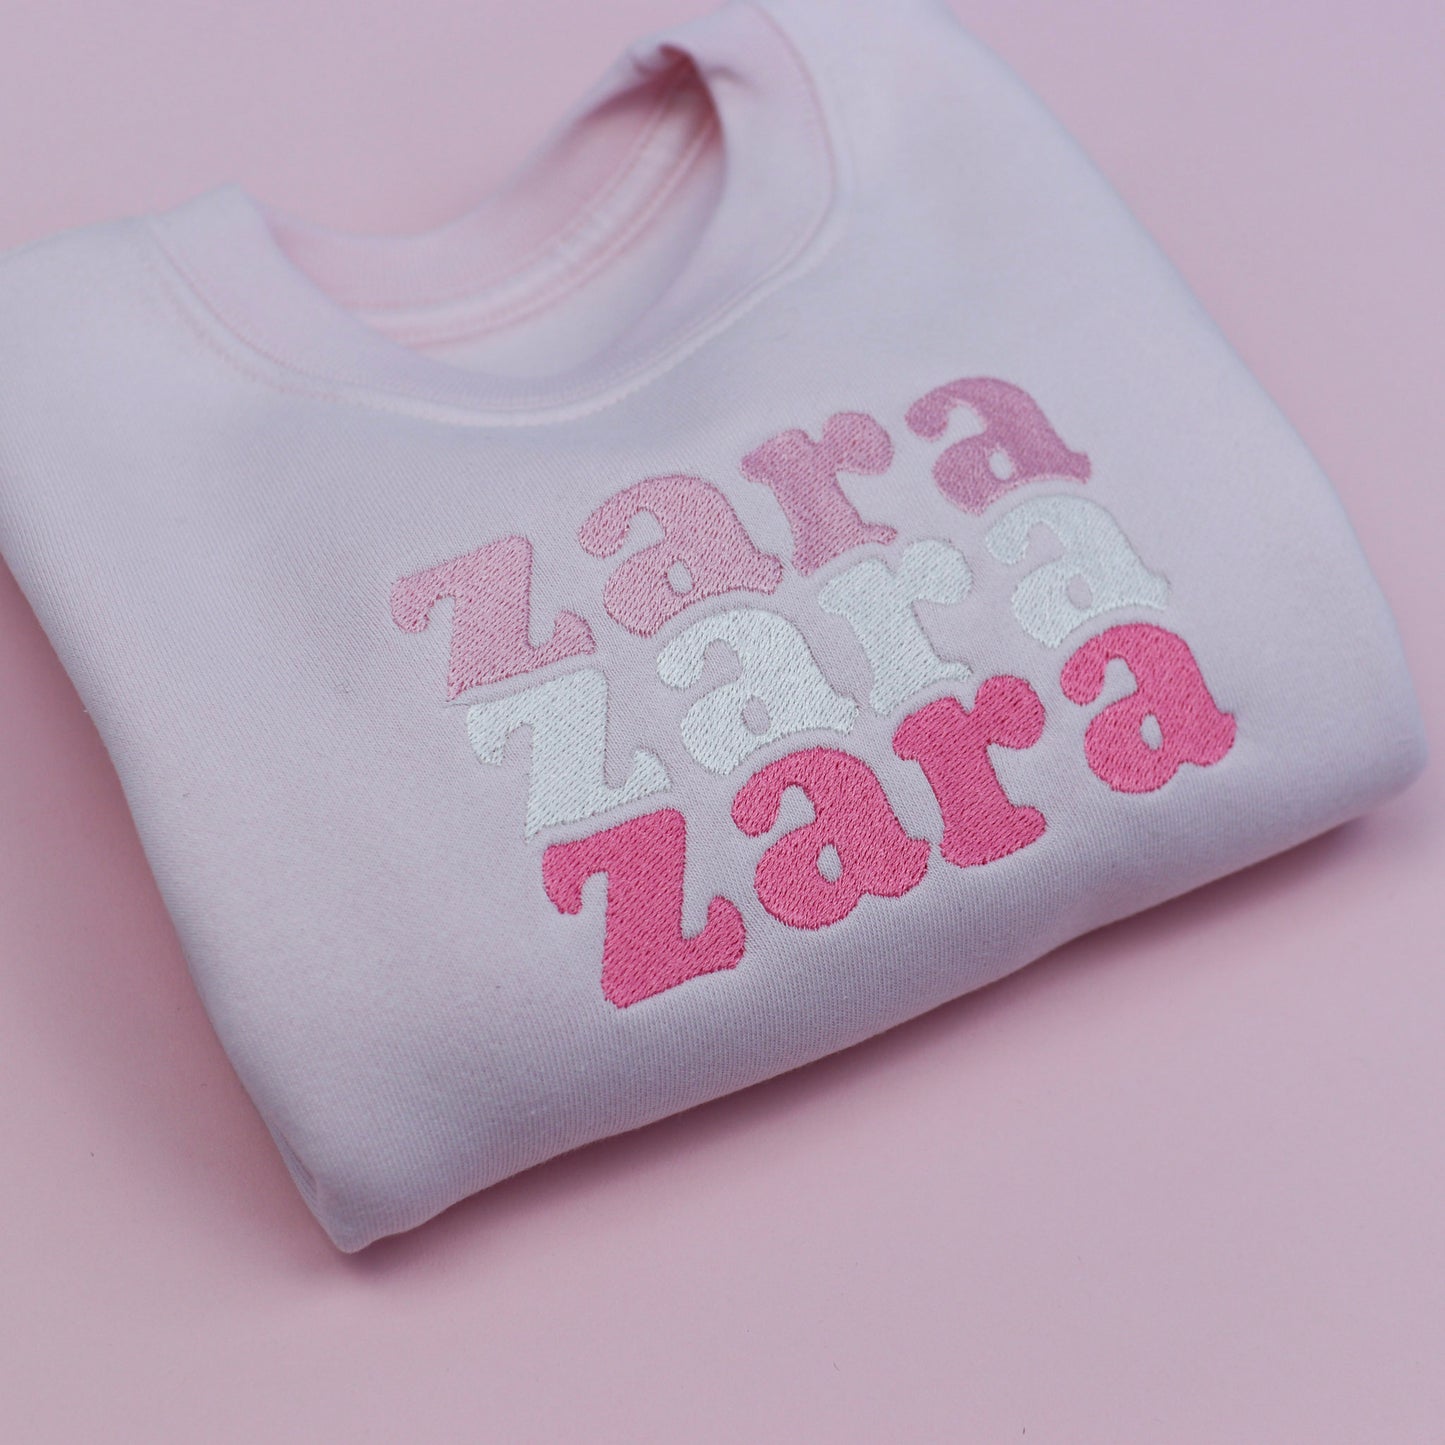 Pastel Pink Triple Name Embroidered Soft Style Sweatshirt